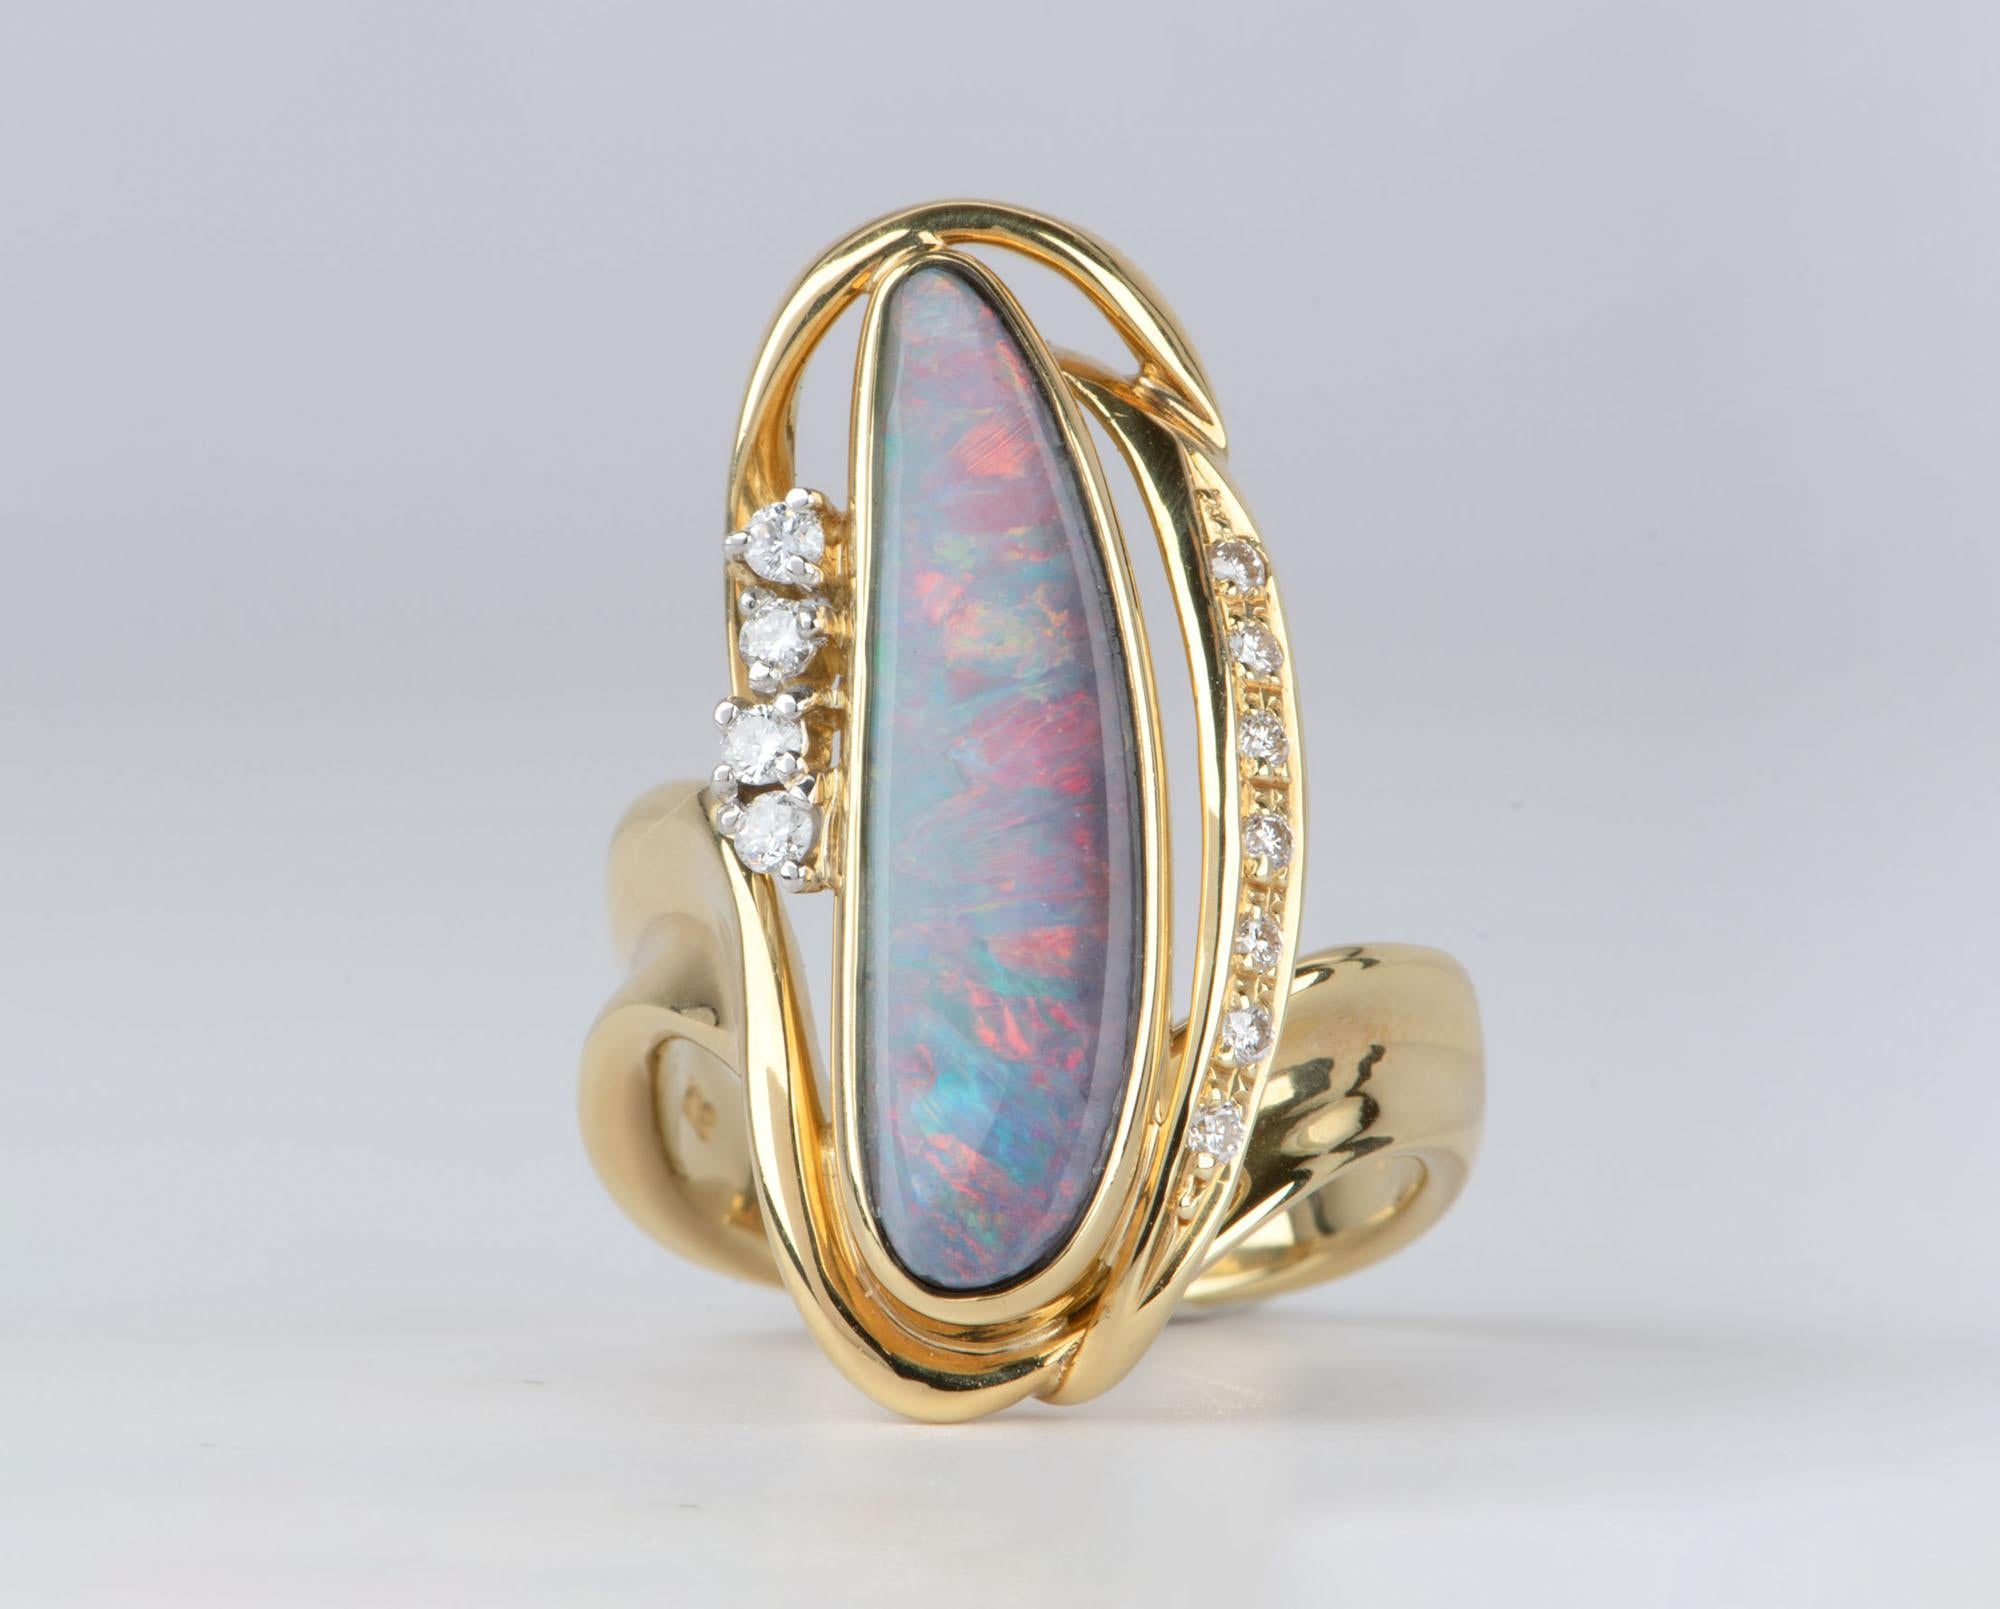 This Australian Boulder Opal and Diamond Ring in 18K Gold is a stunning piece of jewelry that will turn heads! Its elongated shape complements the beautiful opal that beams with bright red, blue, and orange flashes. Its incomparable sparkle and